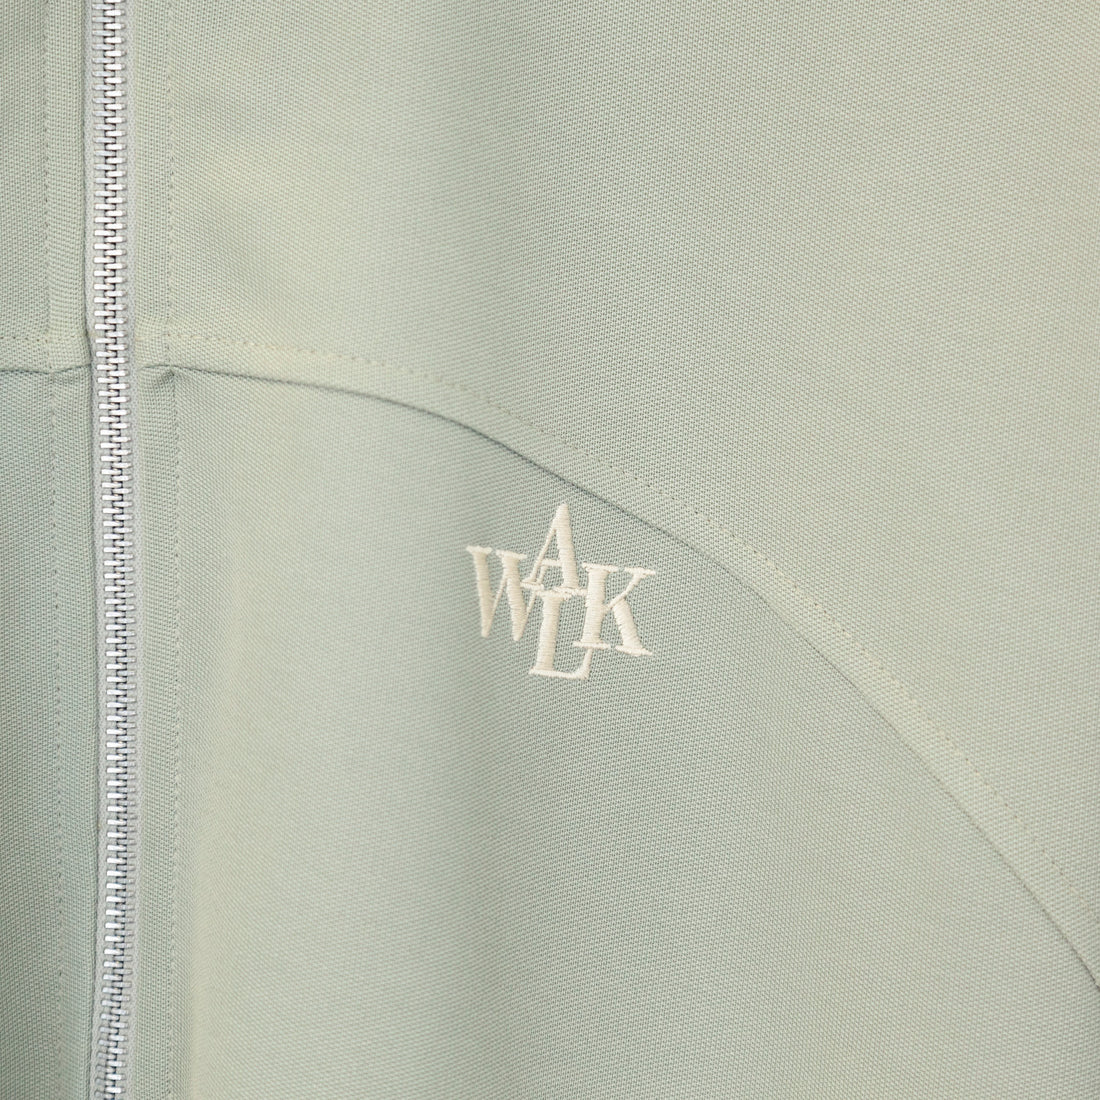 THE PALE GREEN JOGGING JACKET